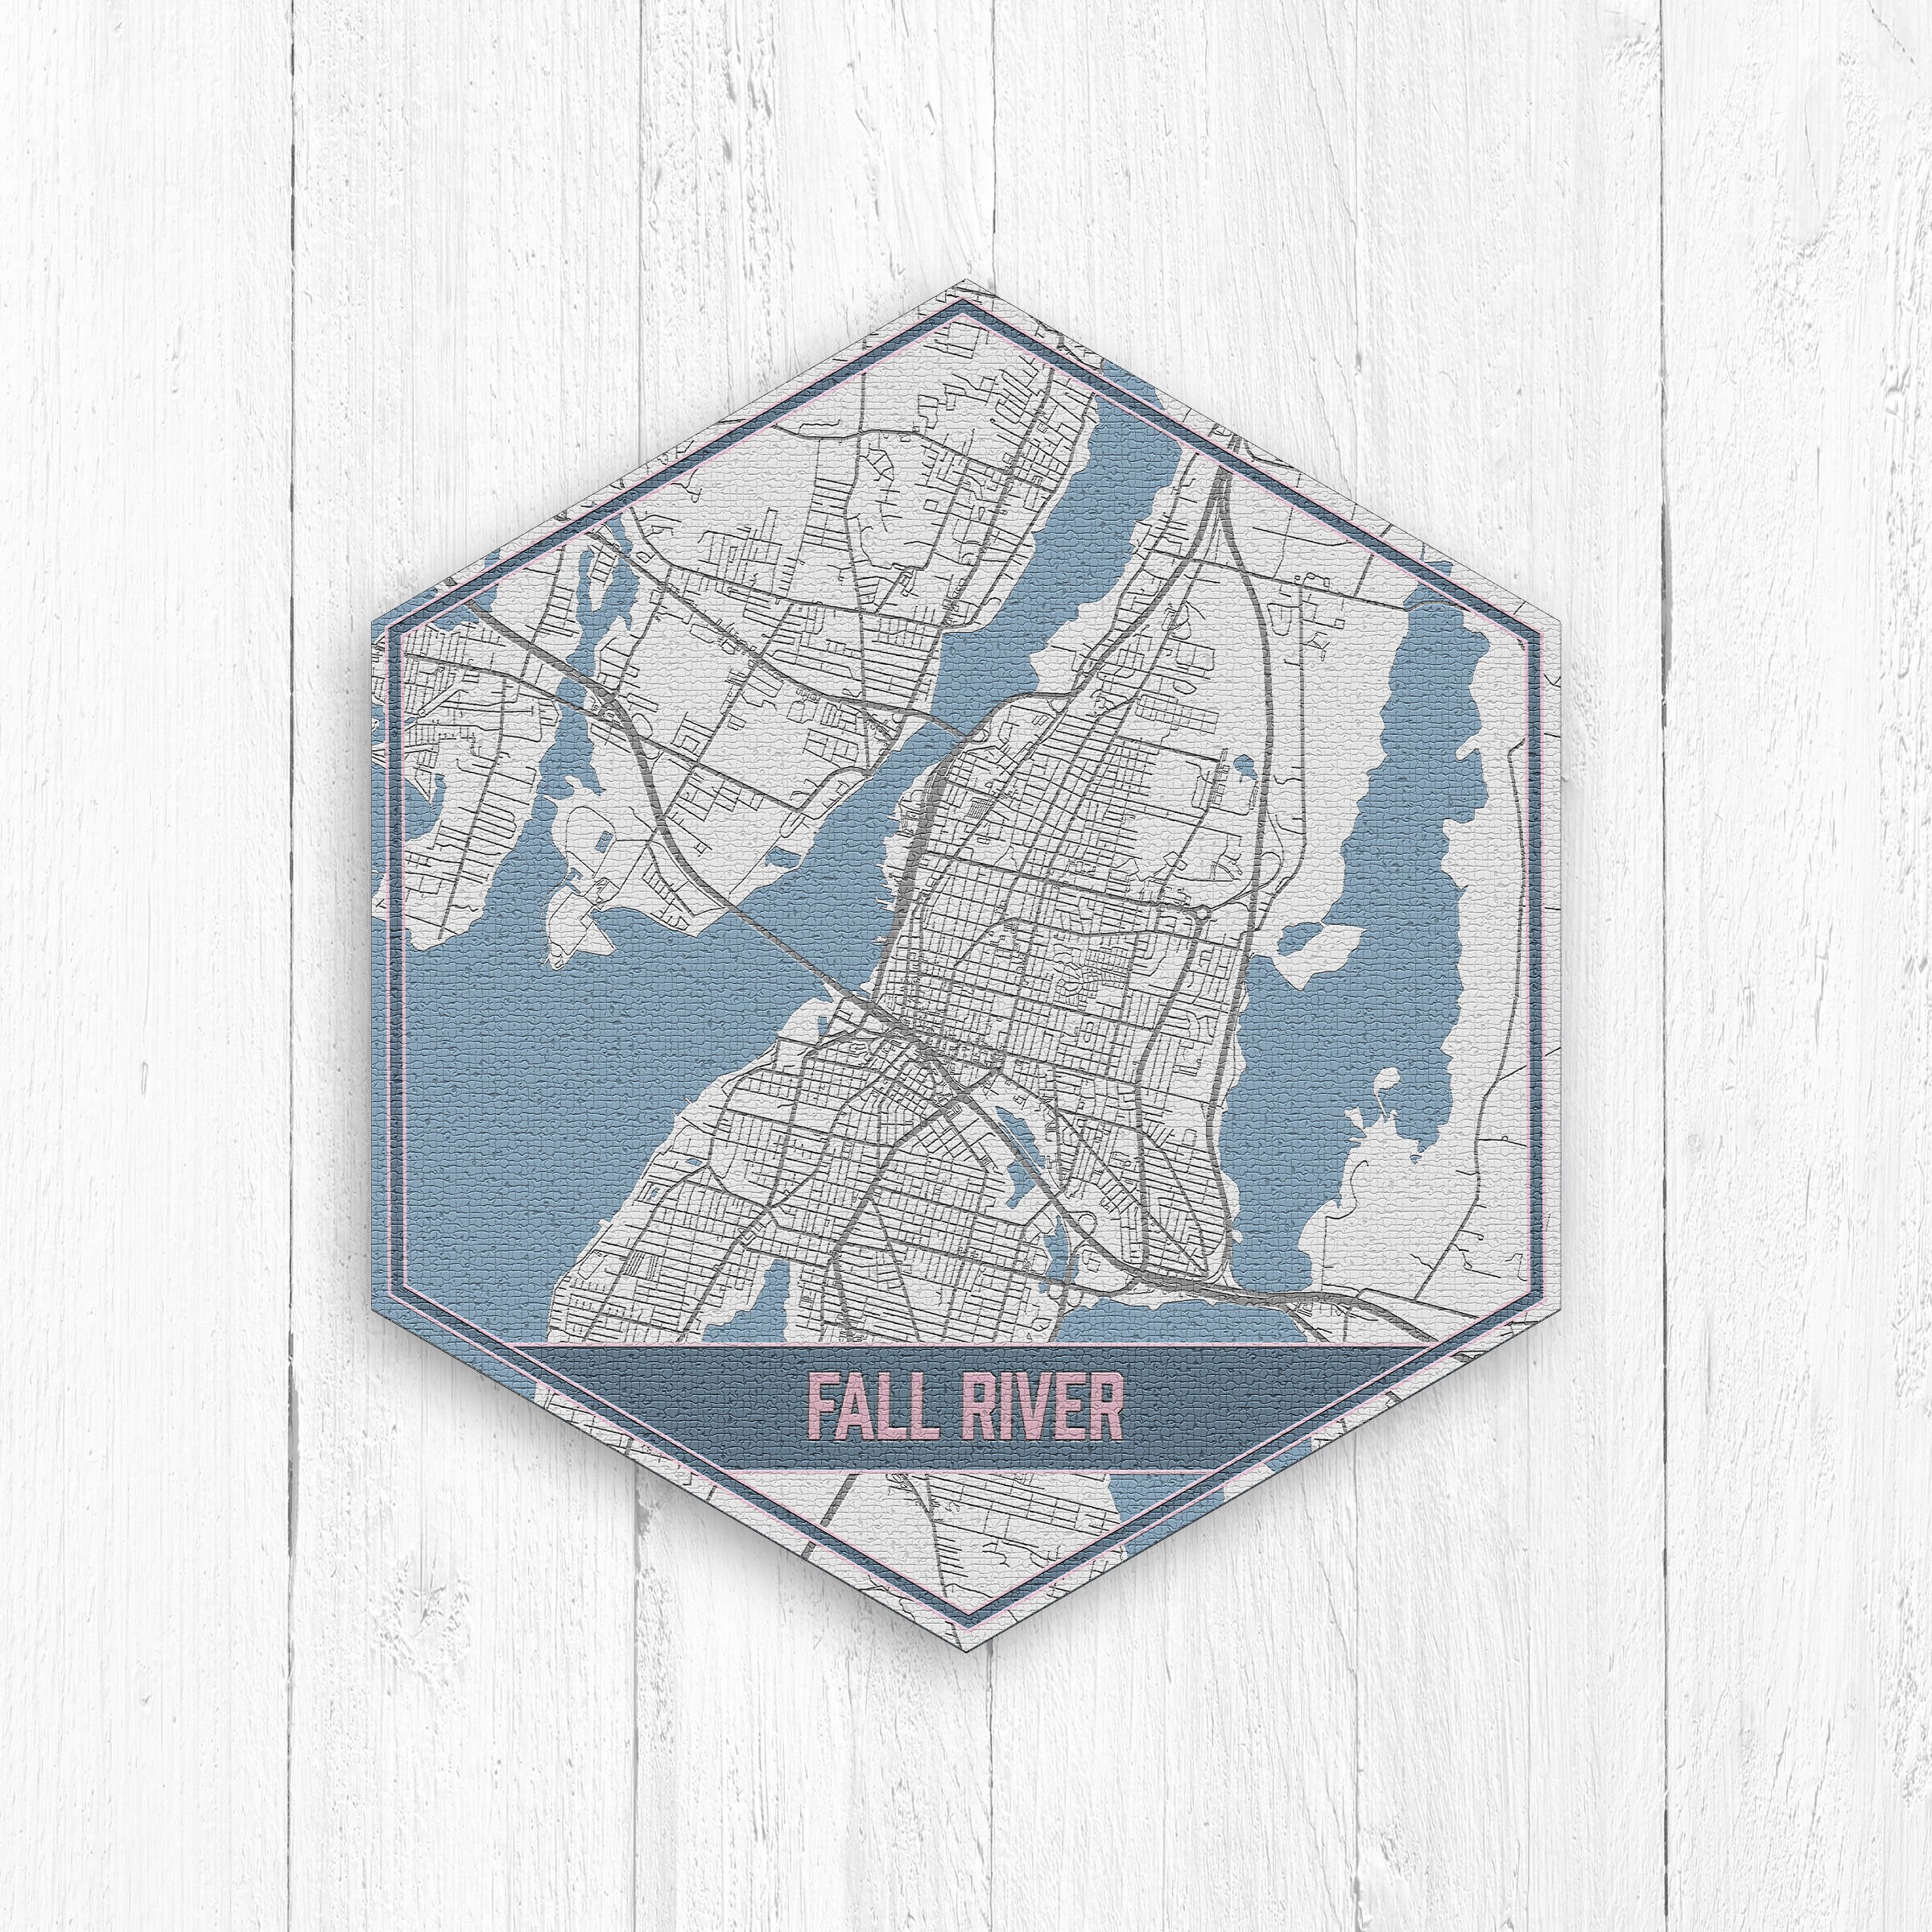 Fall River Massachusetts Hexagon Canvas Street Map Print By Printed Marketplace